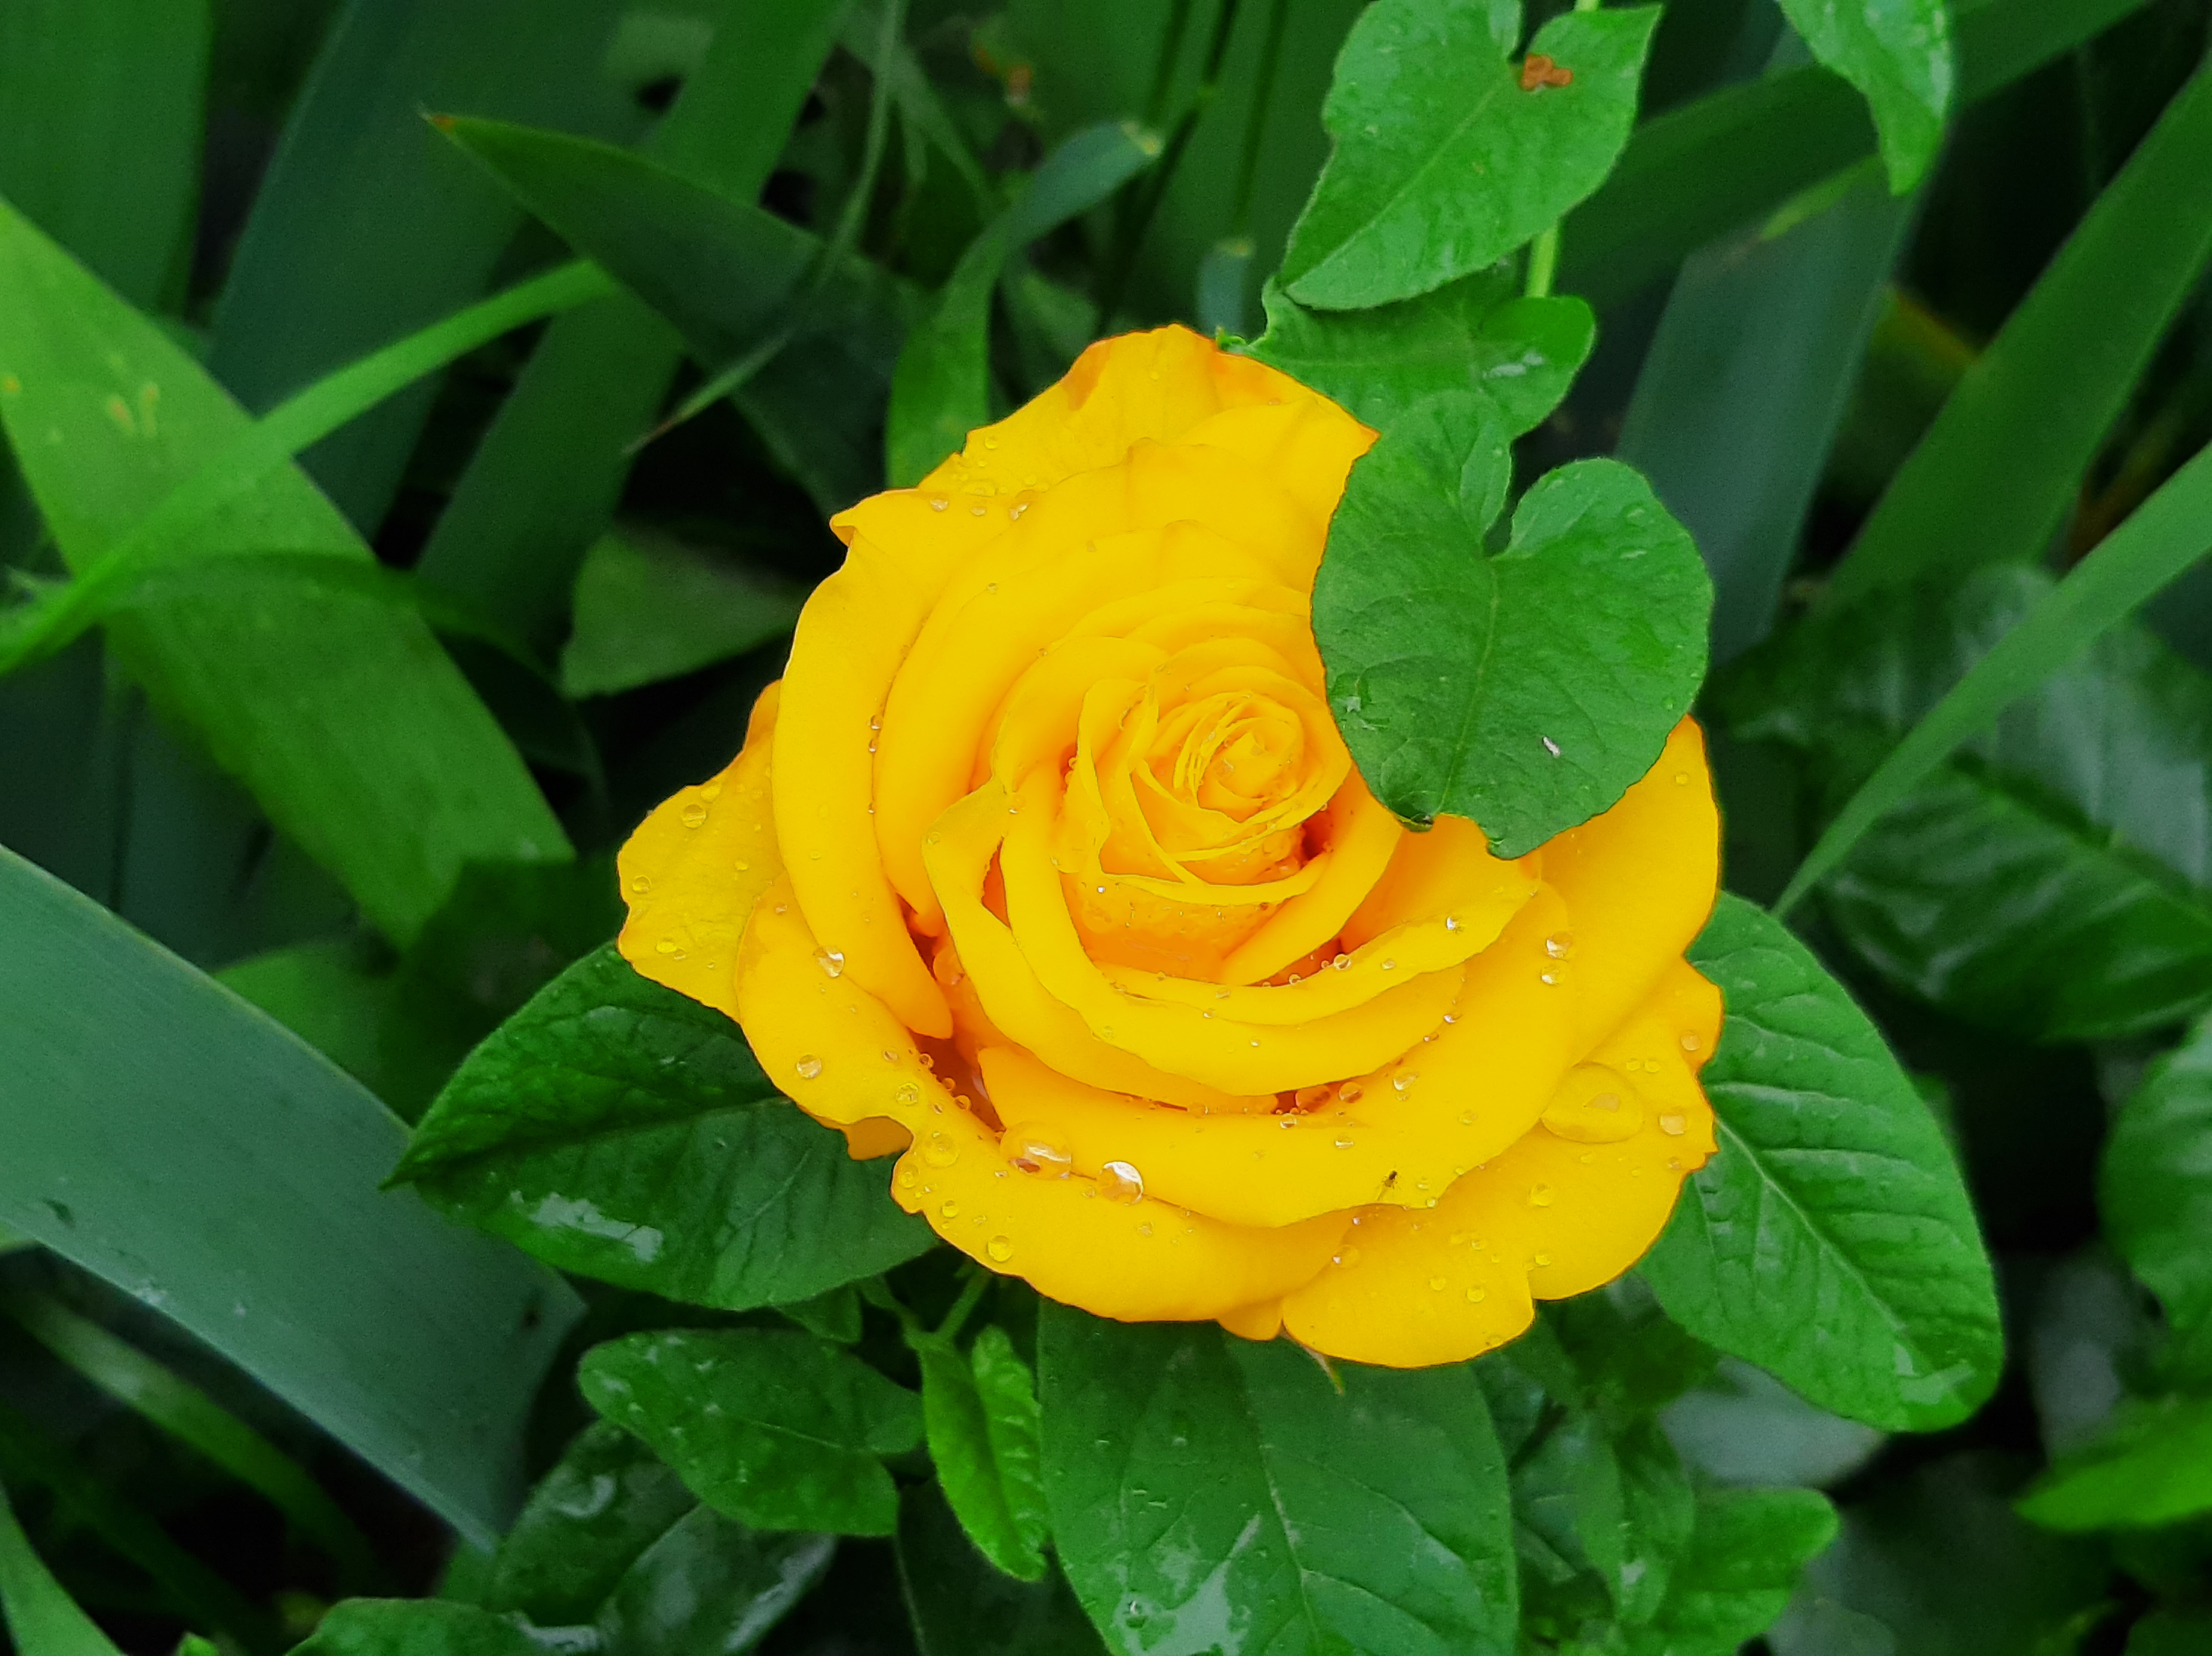 Yellow rose with dewdrops